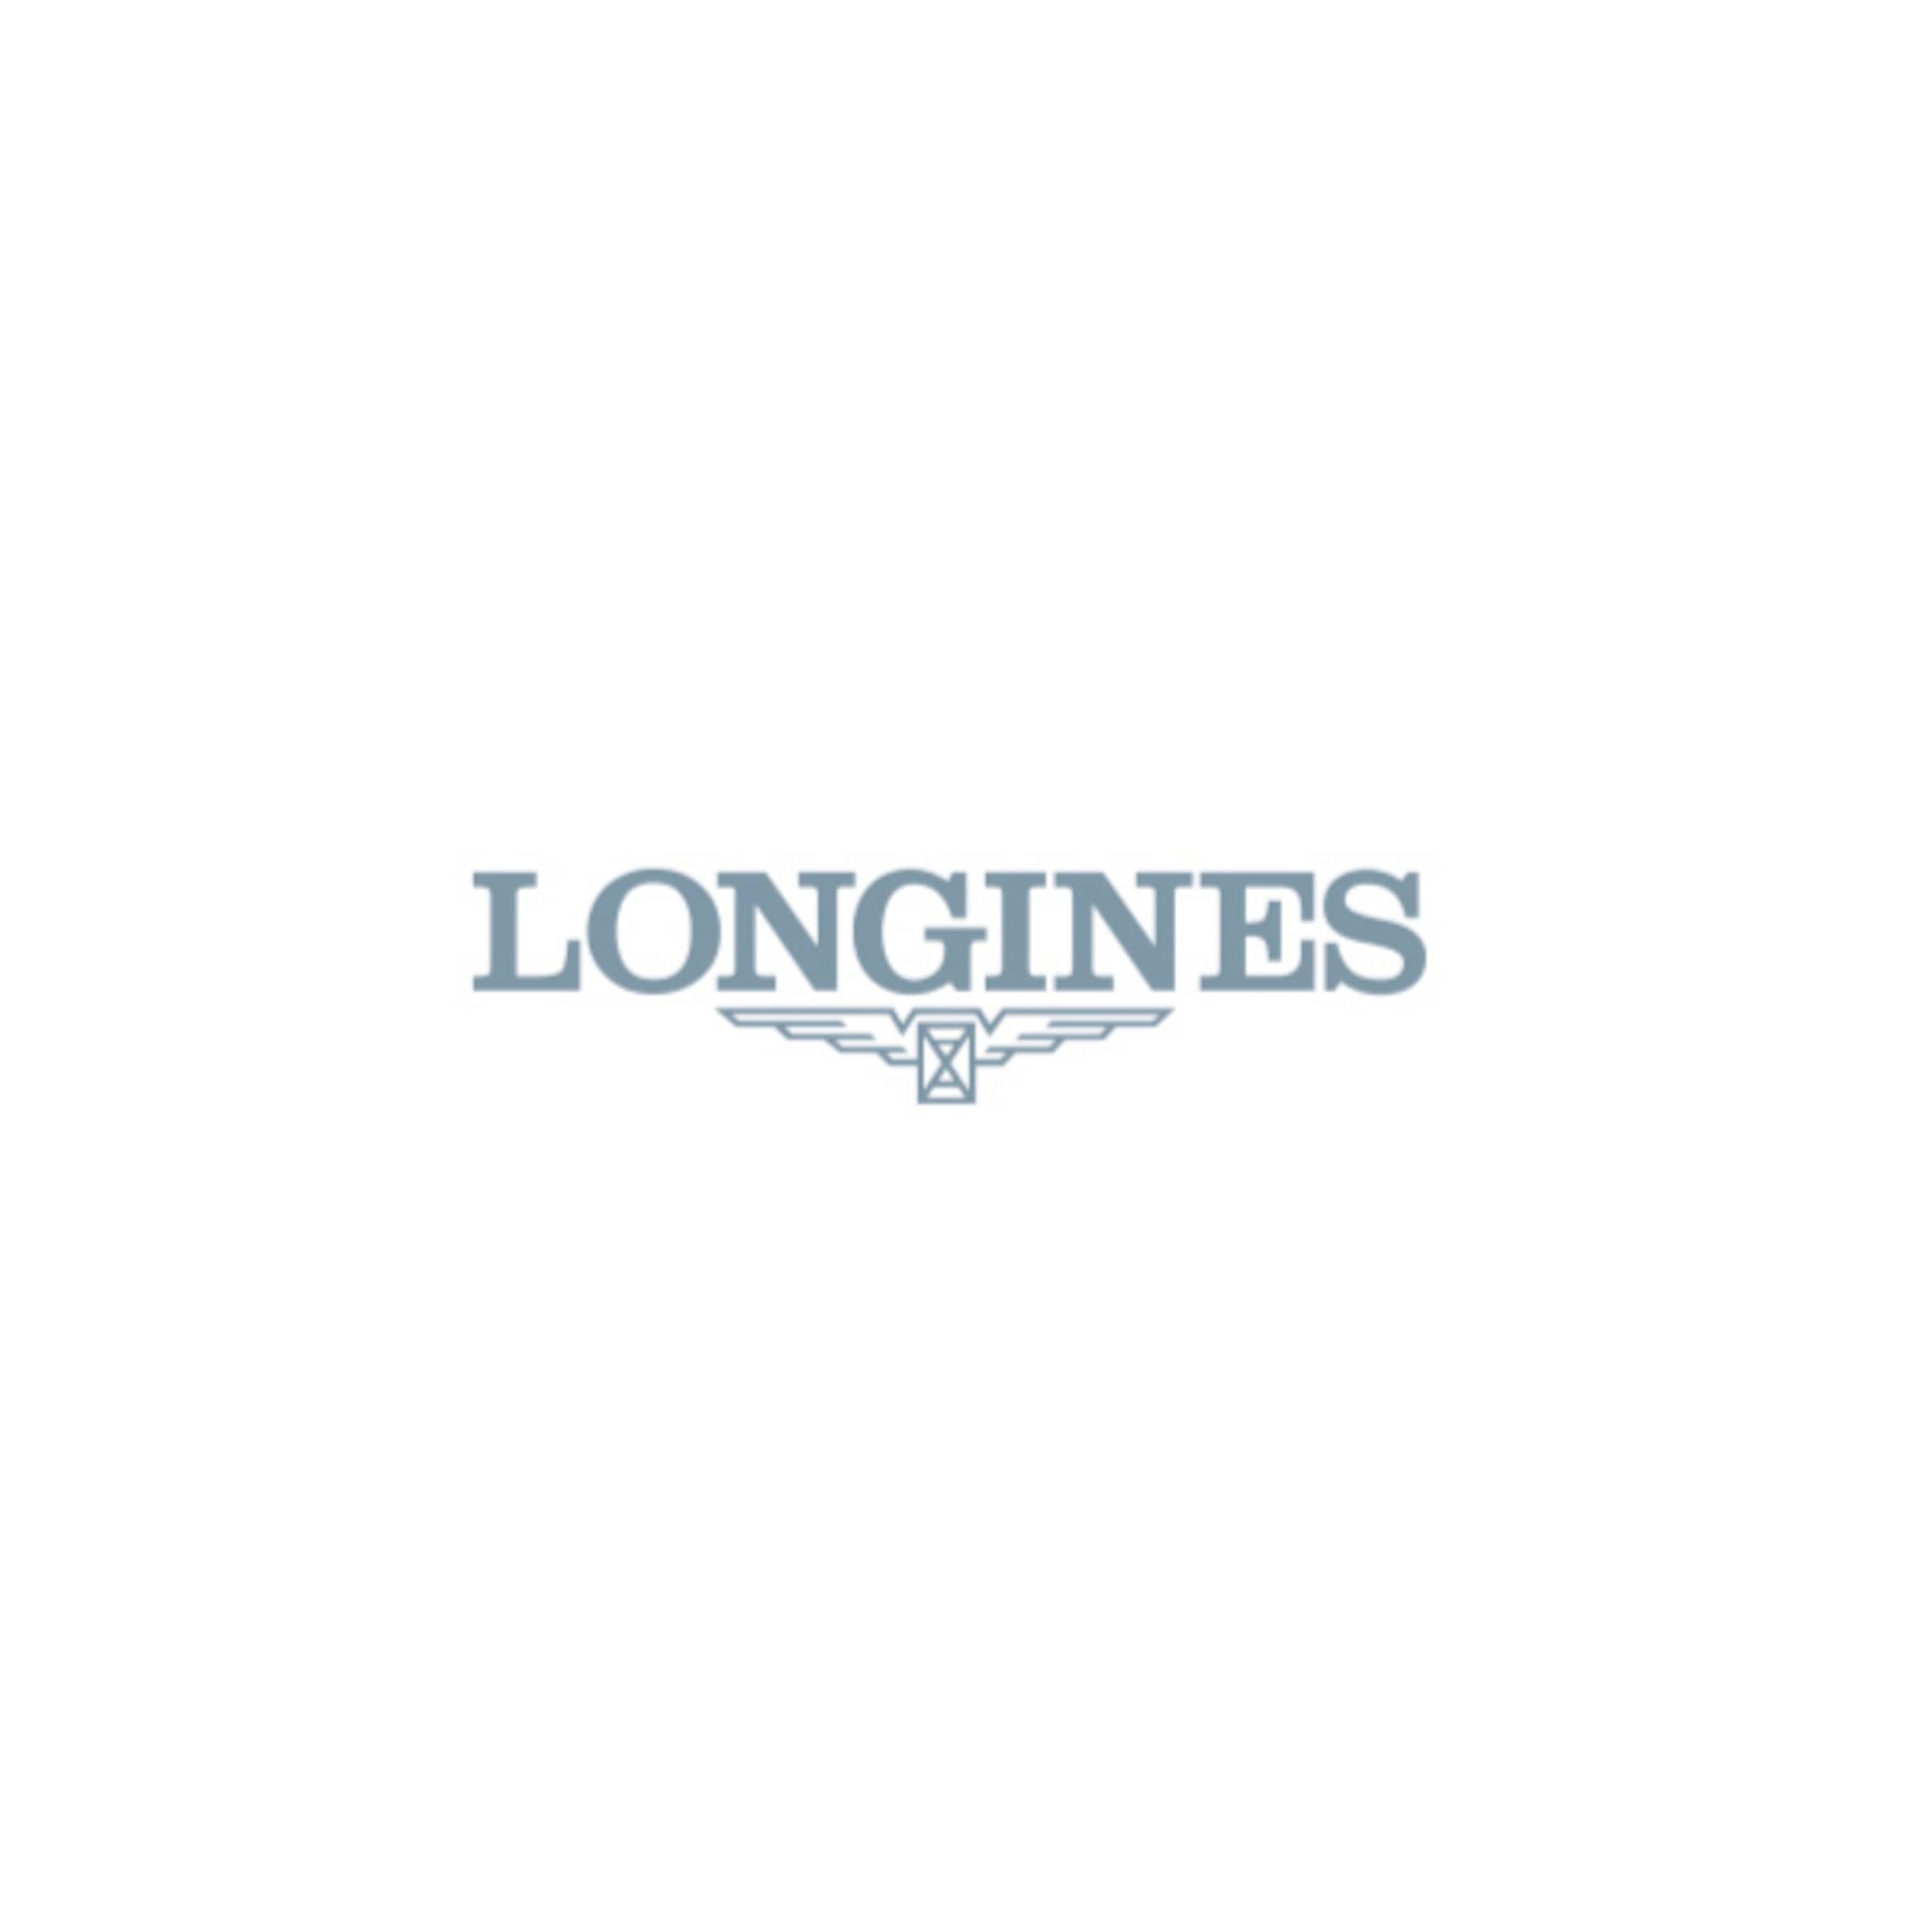 Longines THE LONGINES ELEGANT COLLECTION Automatic Stainless steel Watch - L4.910.4.57.2